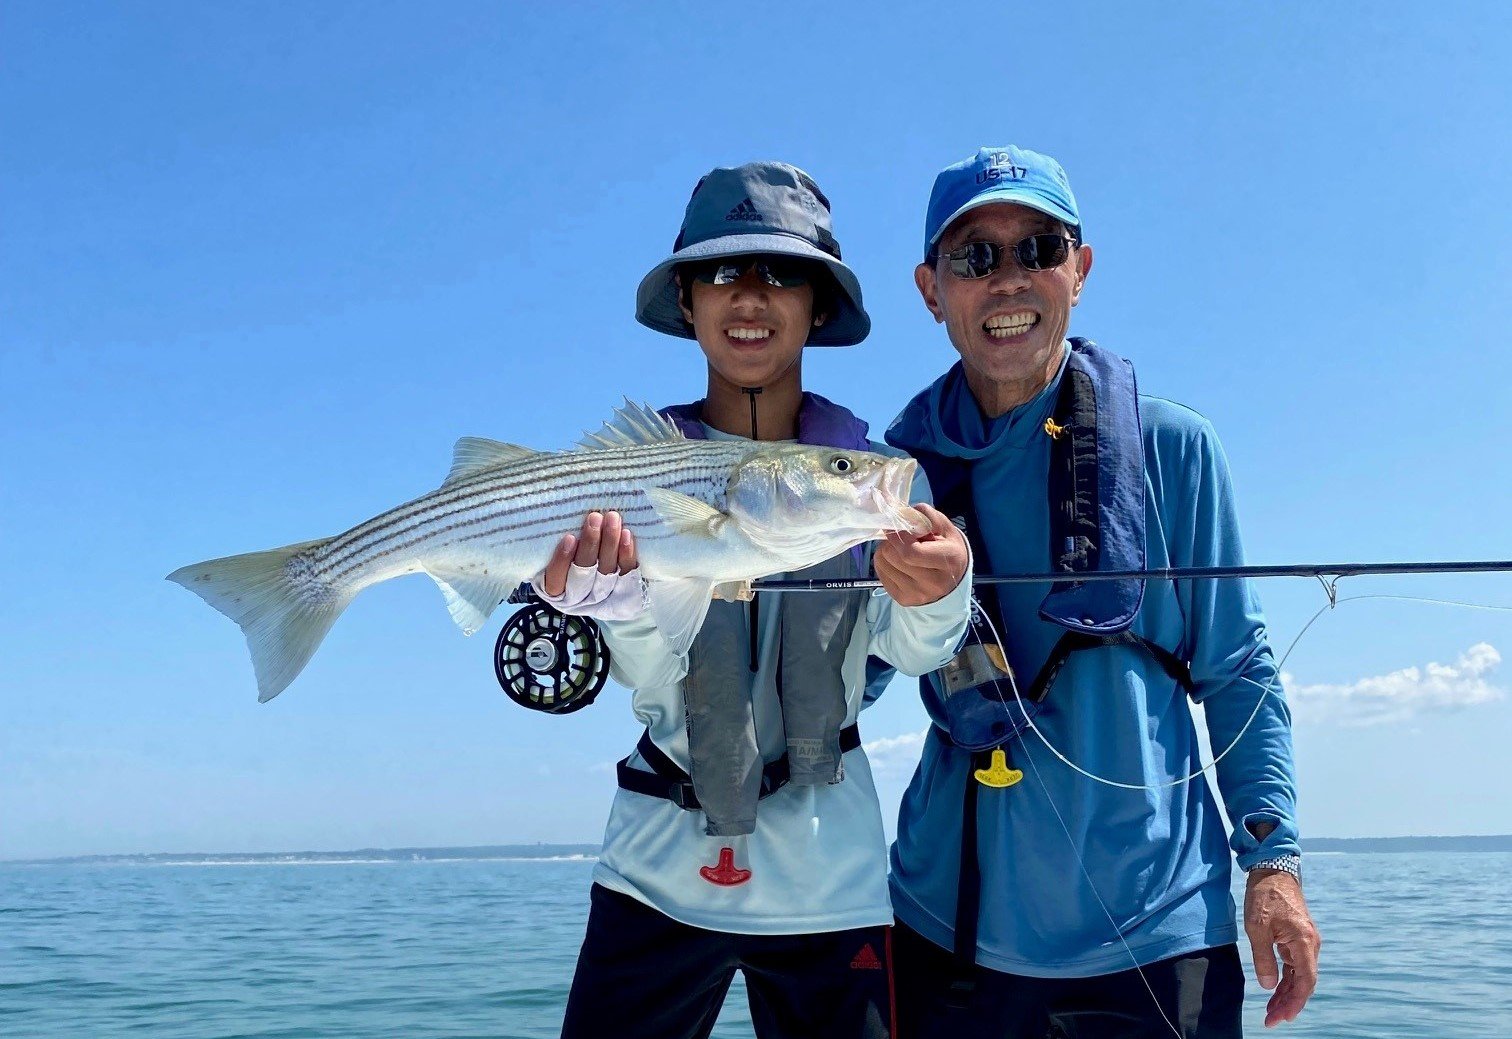 A young man in a bucket hat smiles and holds up a silver striped fish, while an older man in a blue baseball cap smiles next to him. Behind them is blue sky and a large expanse of water.